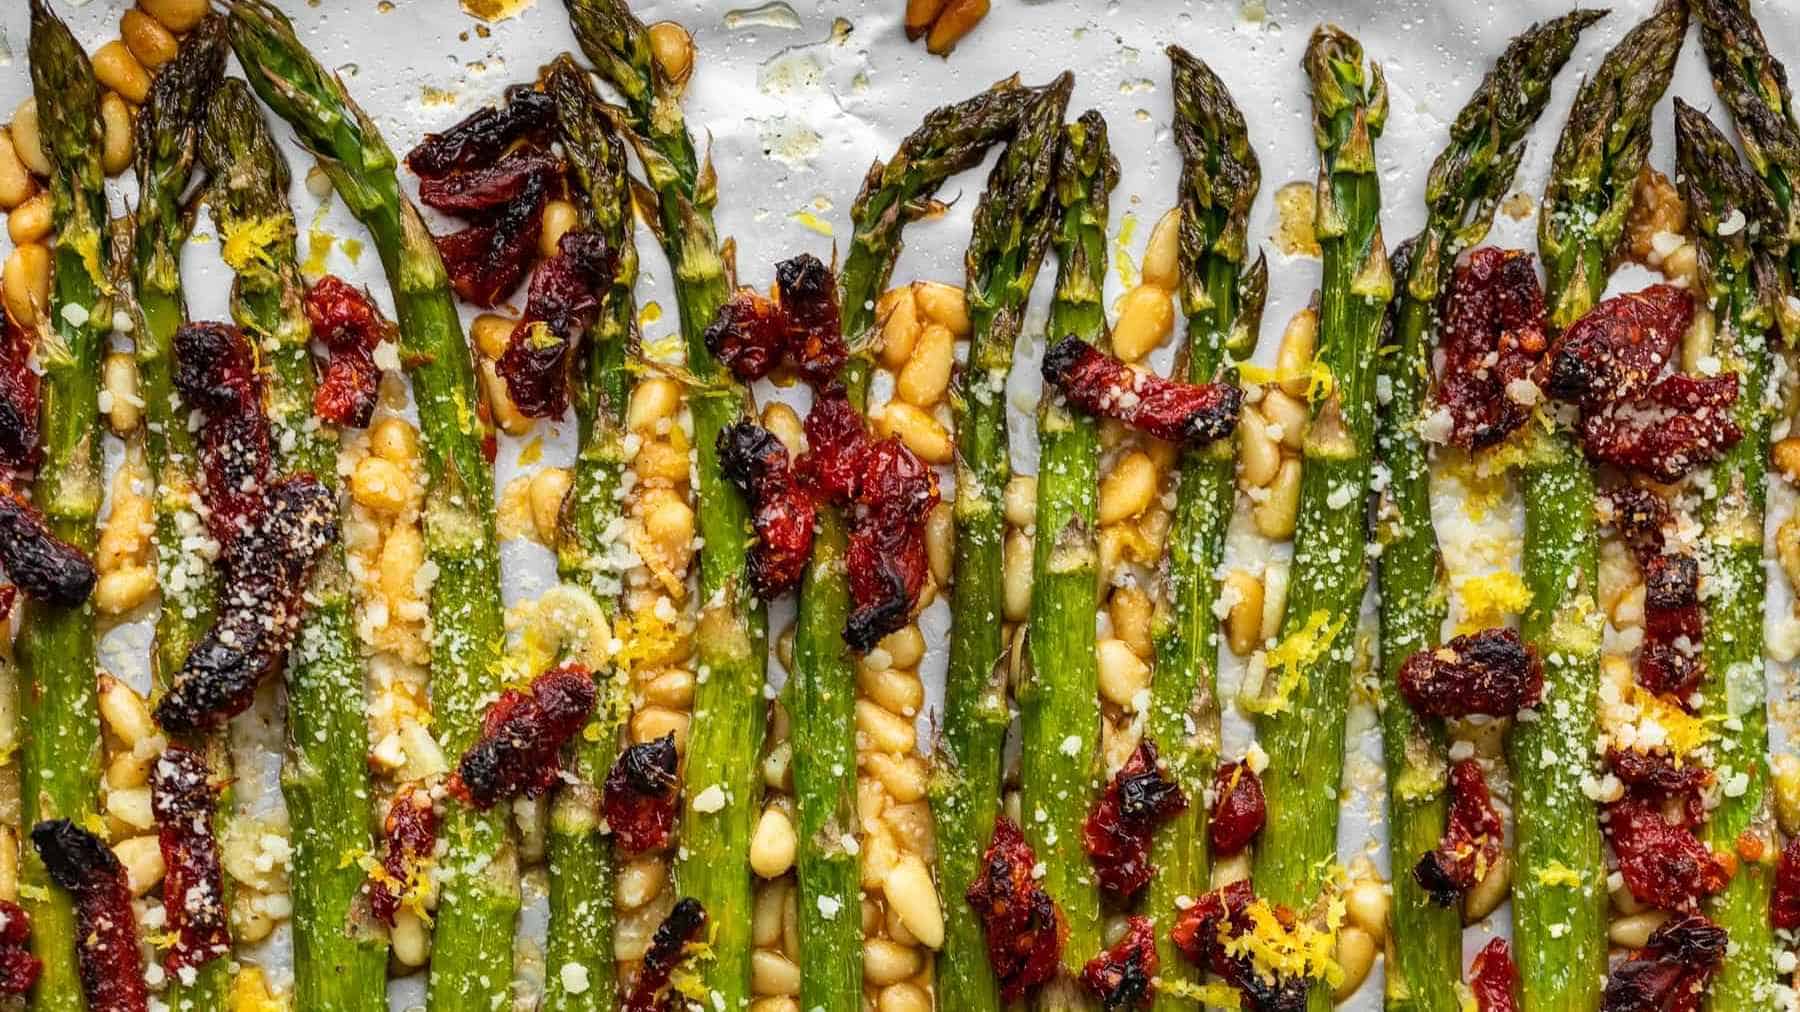 Roasted asparagus with pine nuts, sun-dried tomatoes, and grated parmesan cheese on a baking sheet.